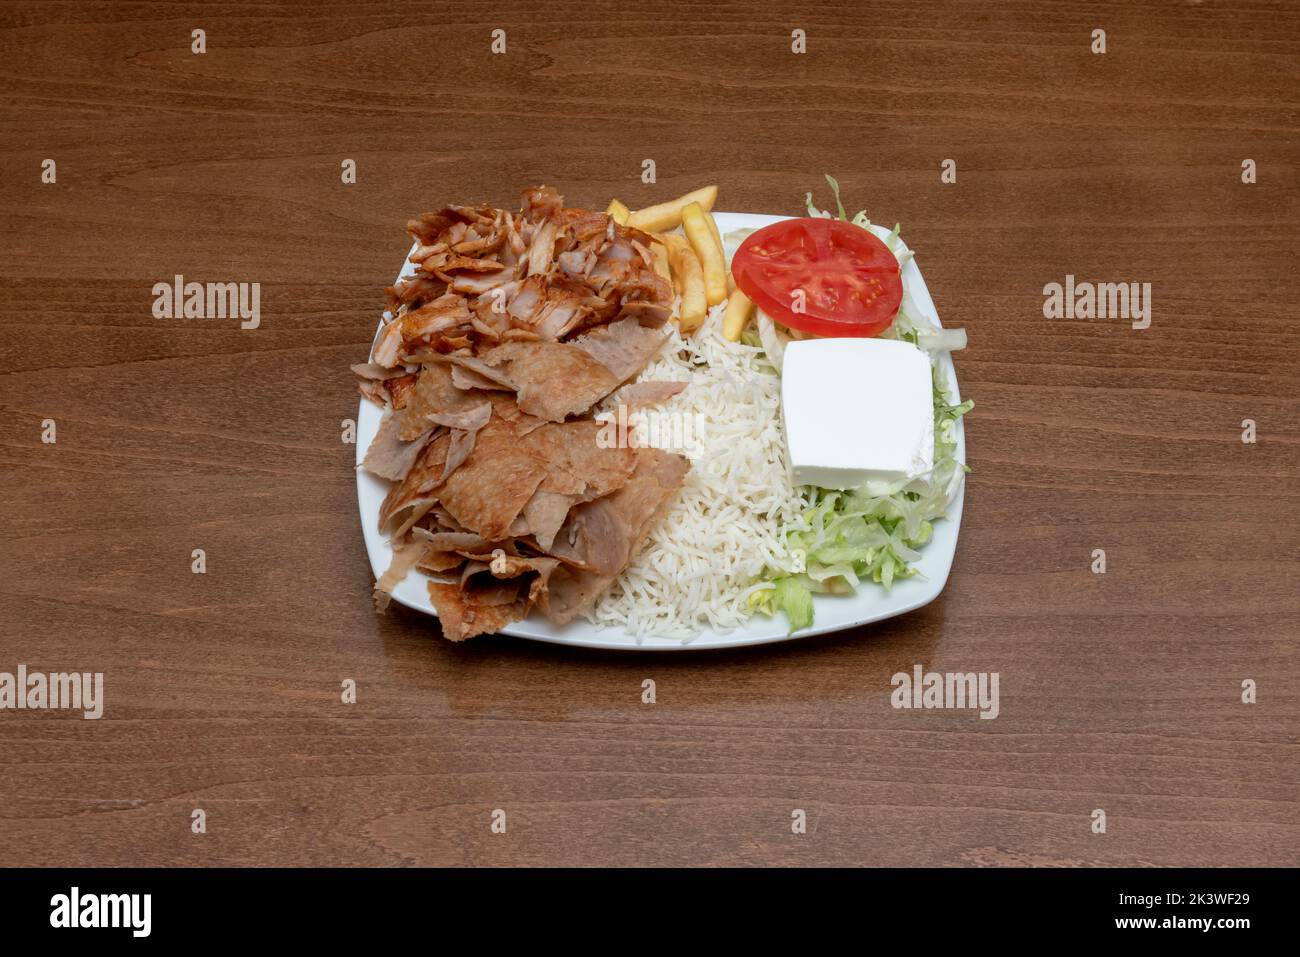 Typical combo plate of pakistani restaurants in europe with lamb and chicken kebab roll meat with french fries, white rice, feta cheese and salad Stock Photo